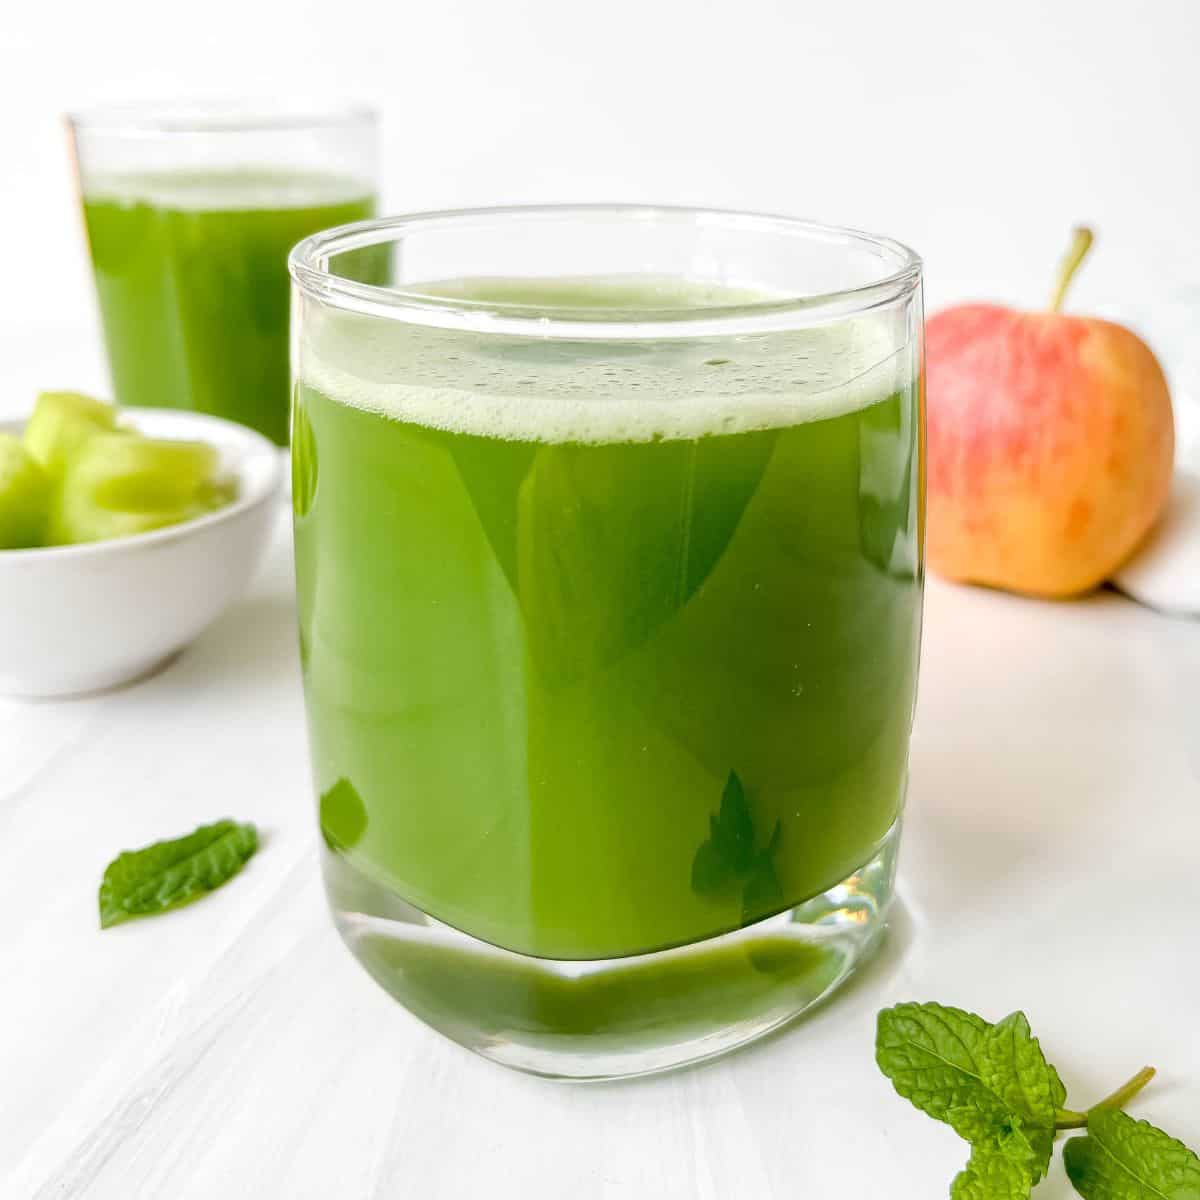 2 glasses of green juice with an apple, mint and cucumber slices around them.